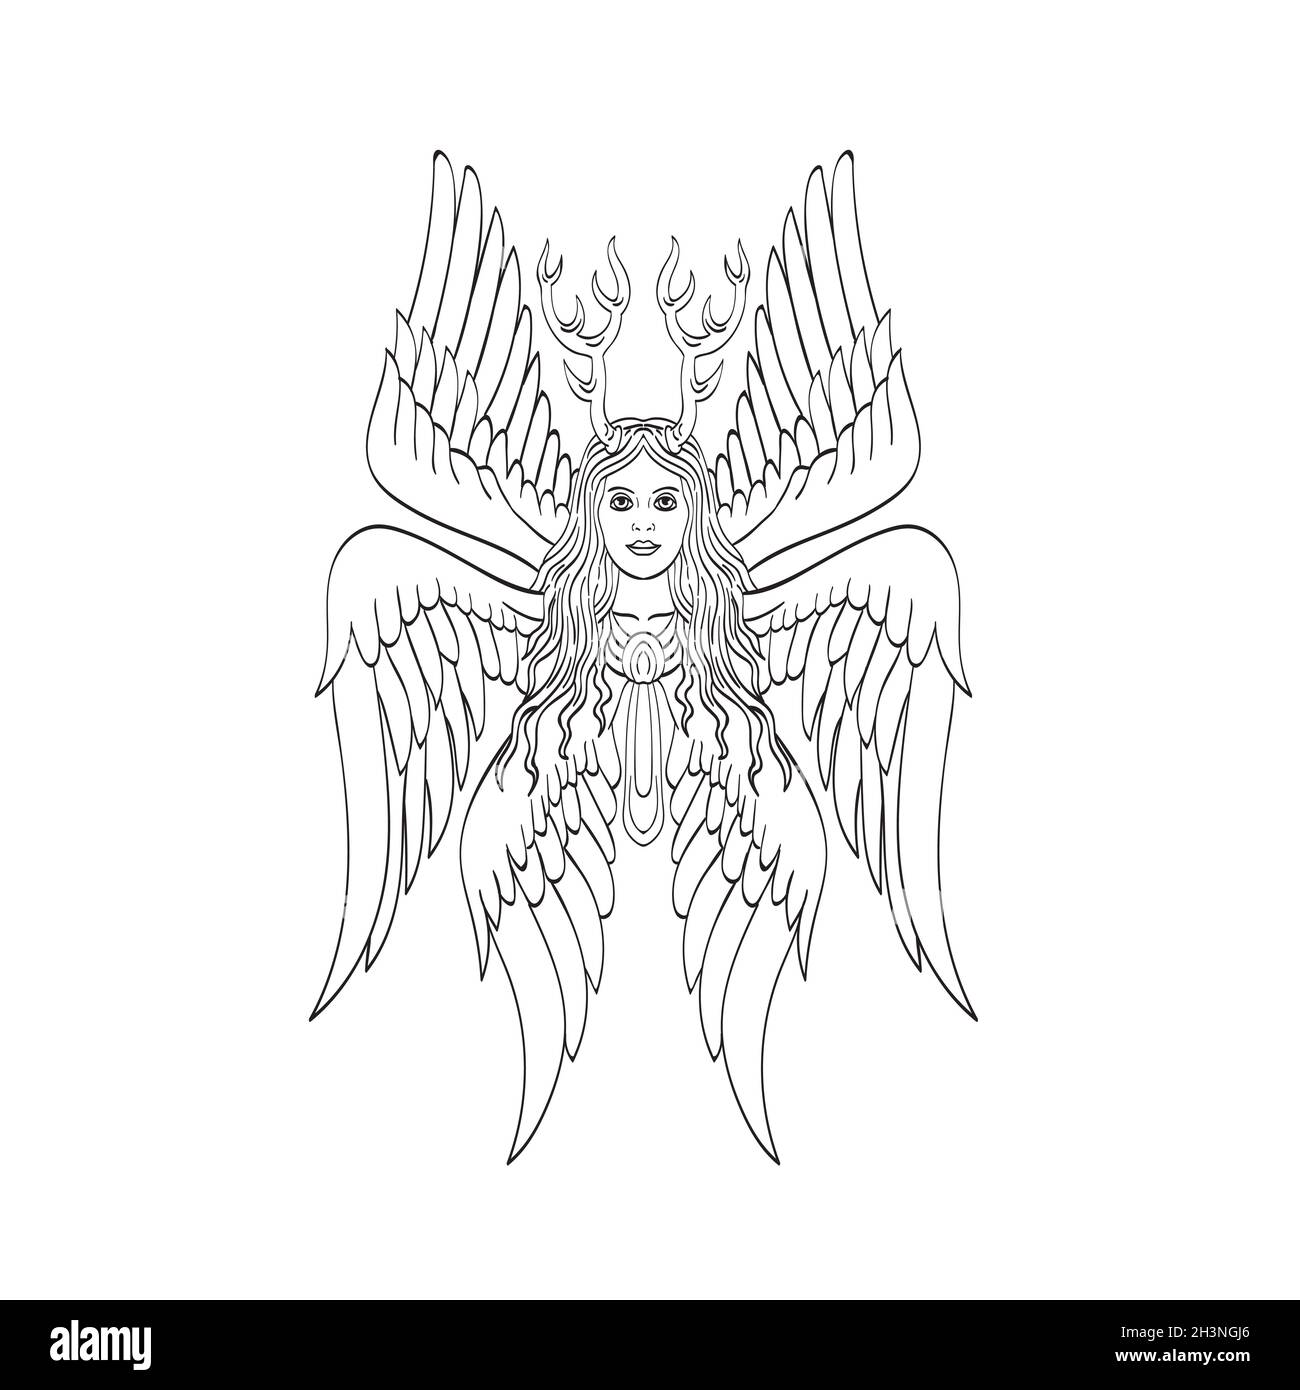 Seraph or Seraphim a Six-Winged Fiery Angel with Six Wings and Deer Antlers Tattoo Style Black and White Stock Photo